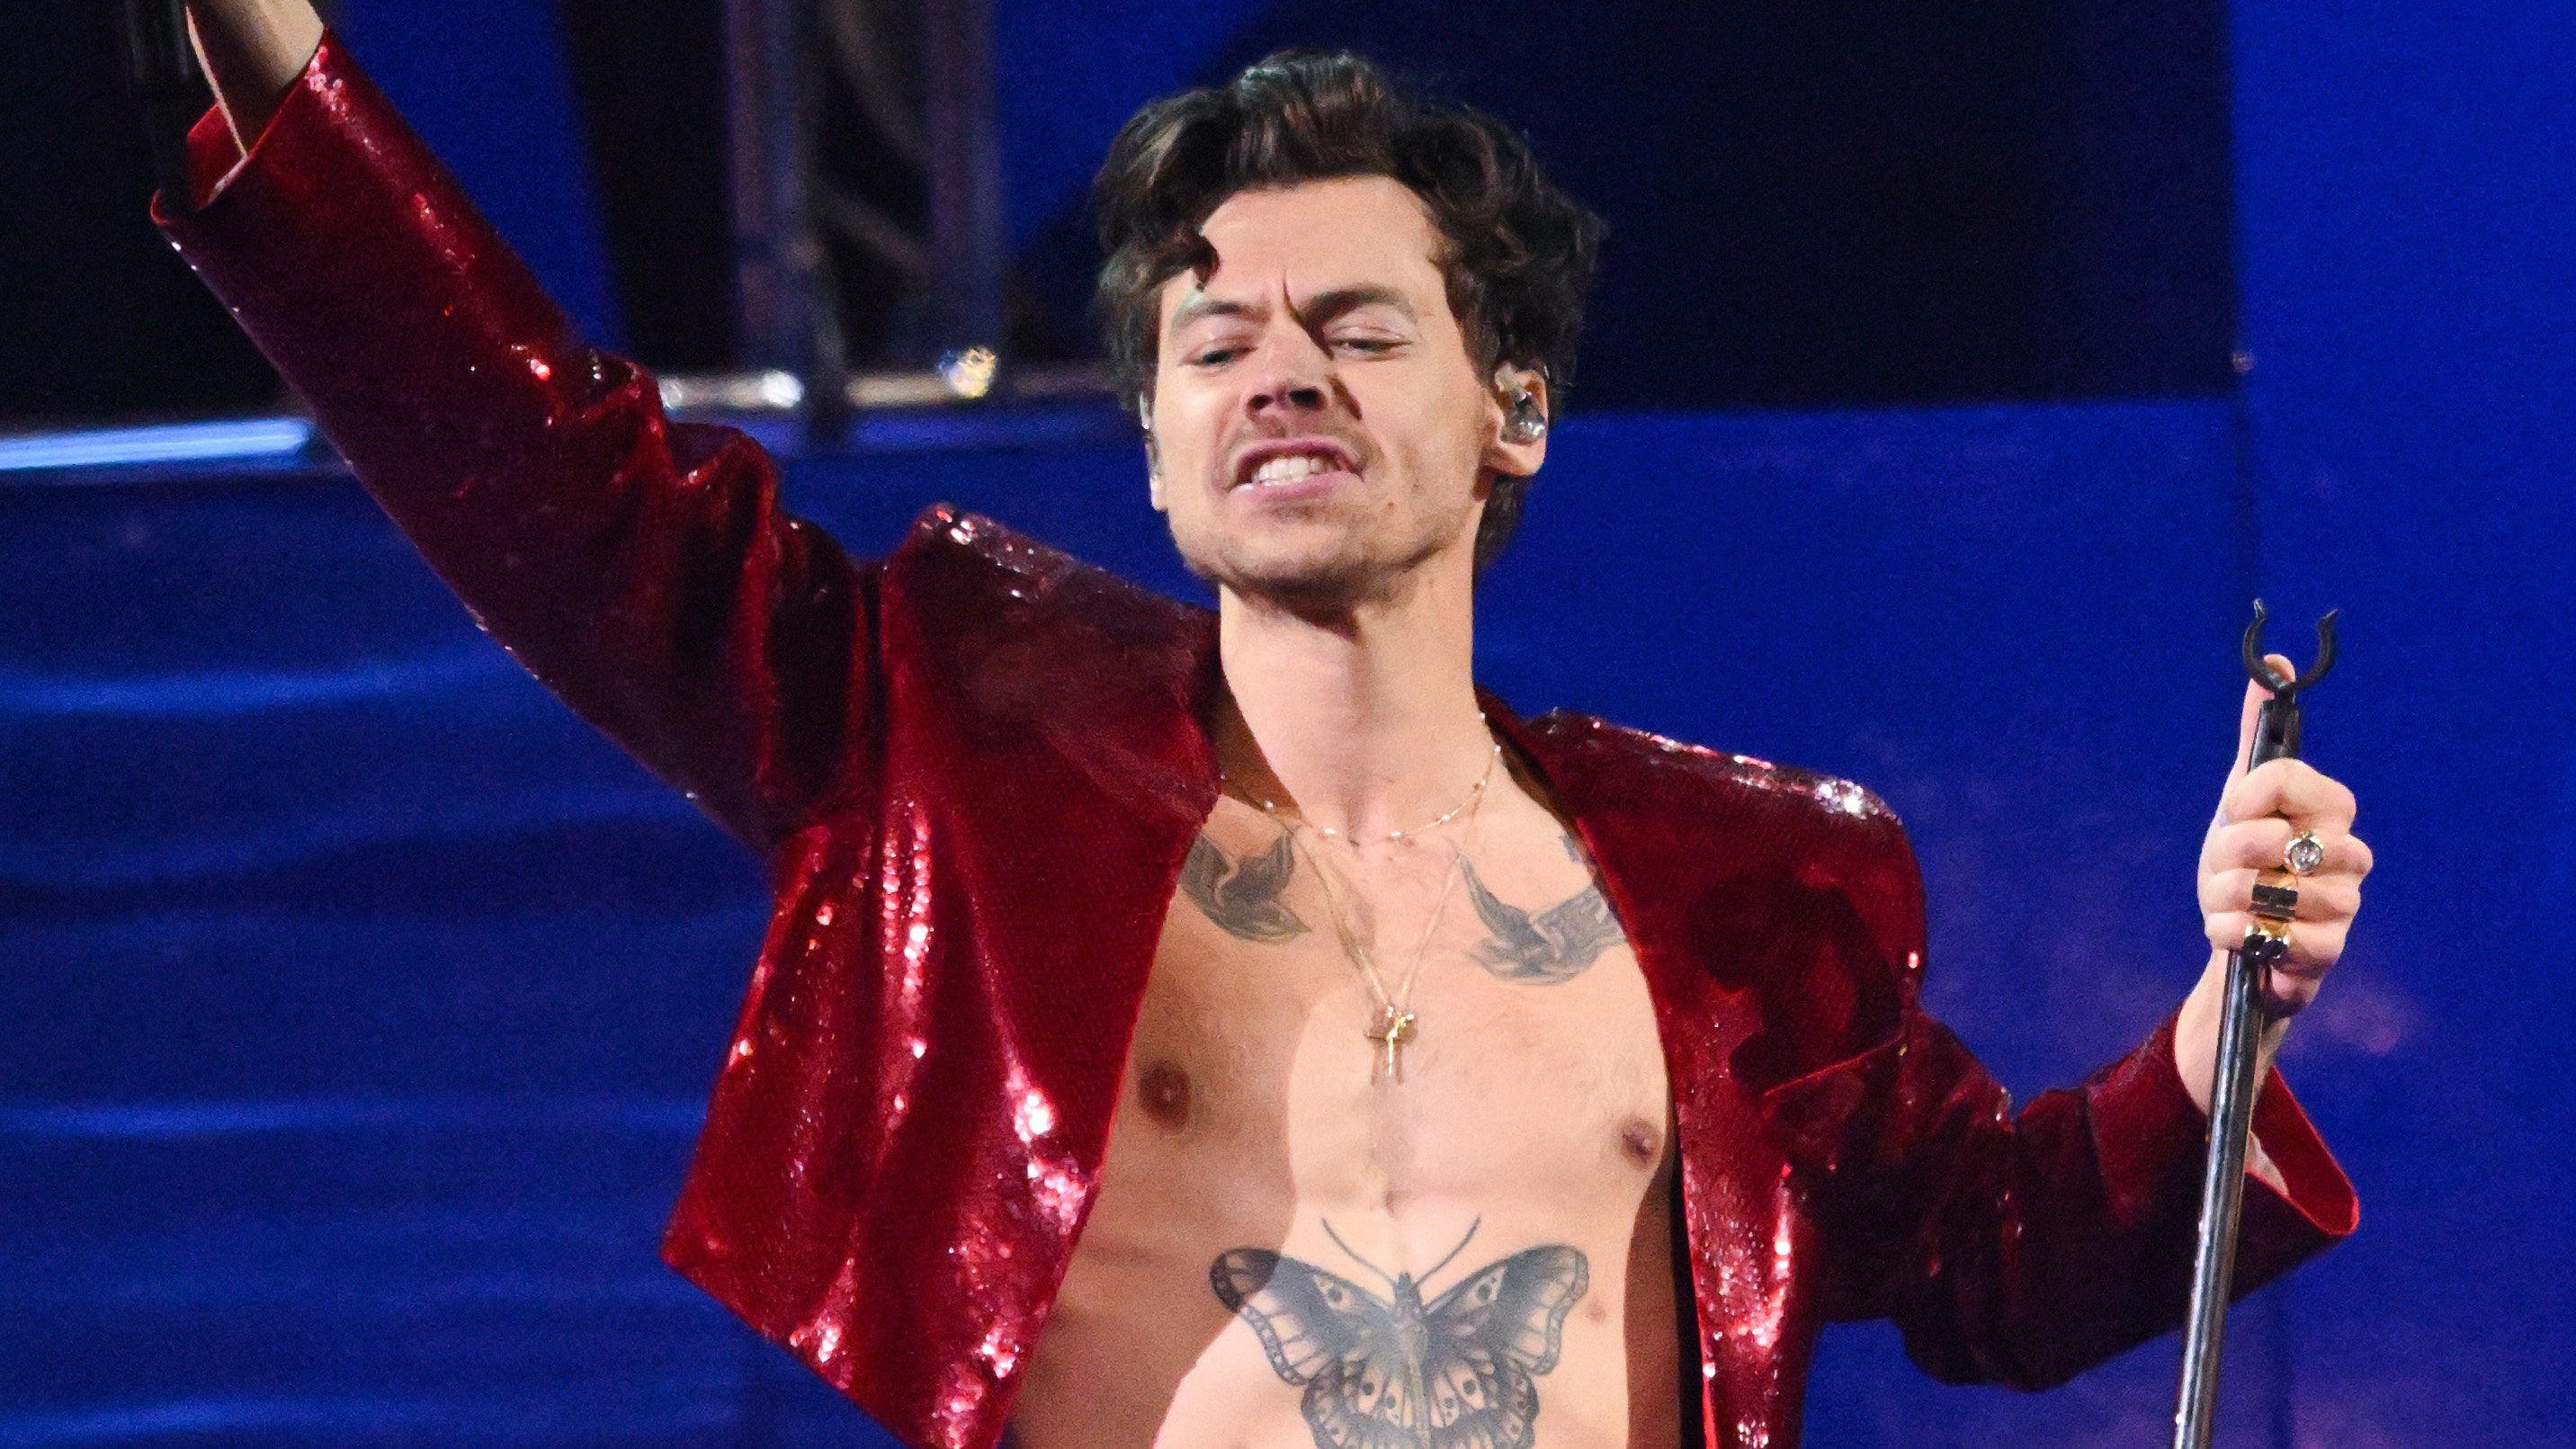 Harry Styles closes his eyes passionately on stage while performing at The BRIT Awards in a sequined jacket and no shirt